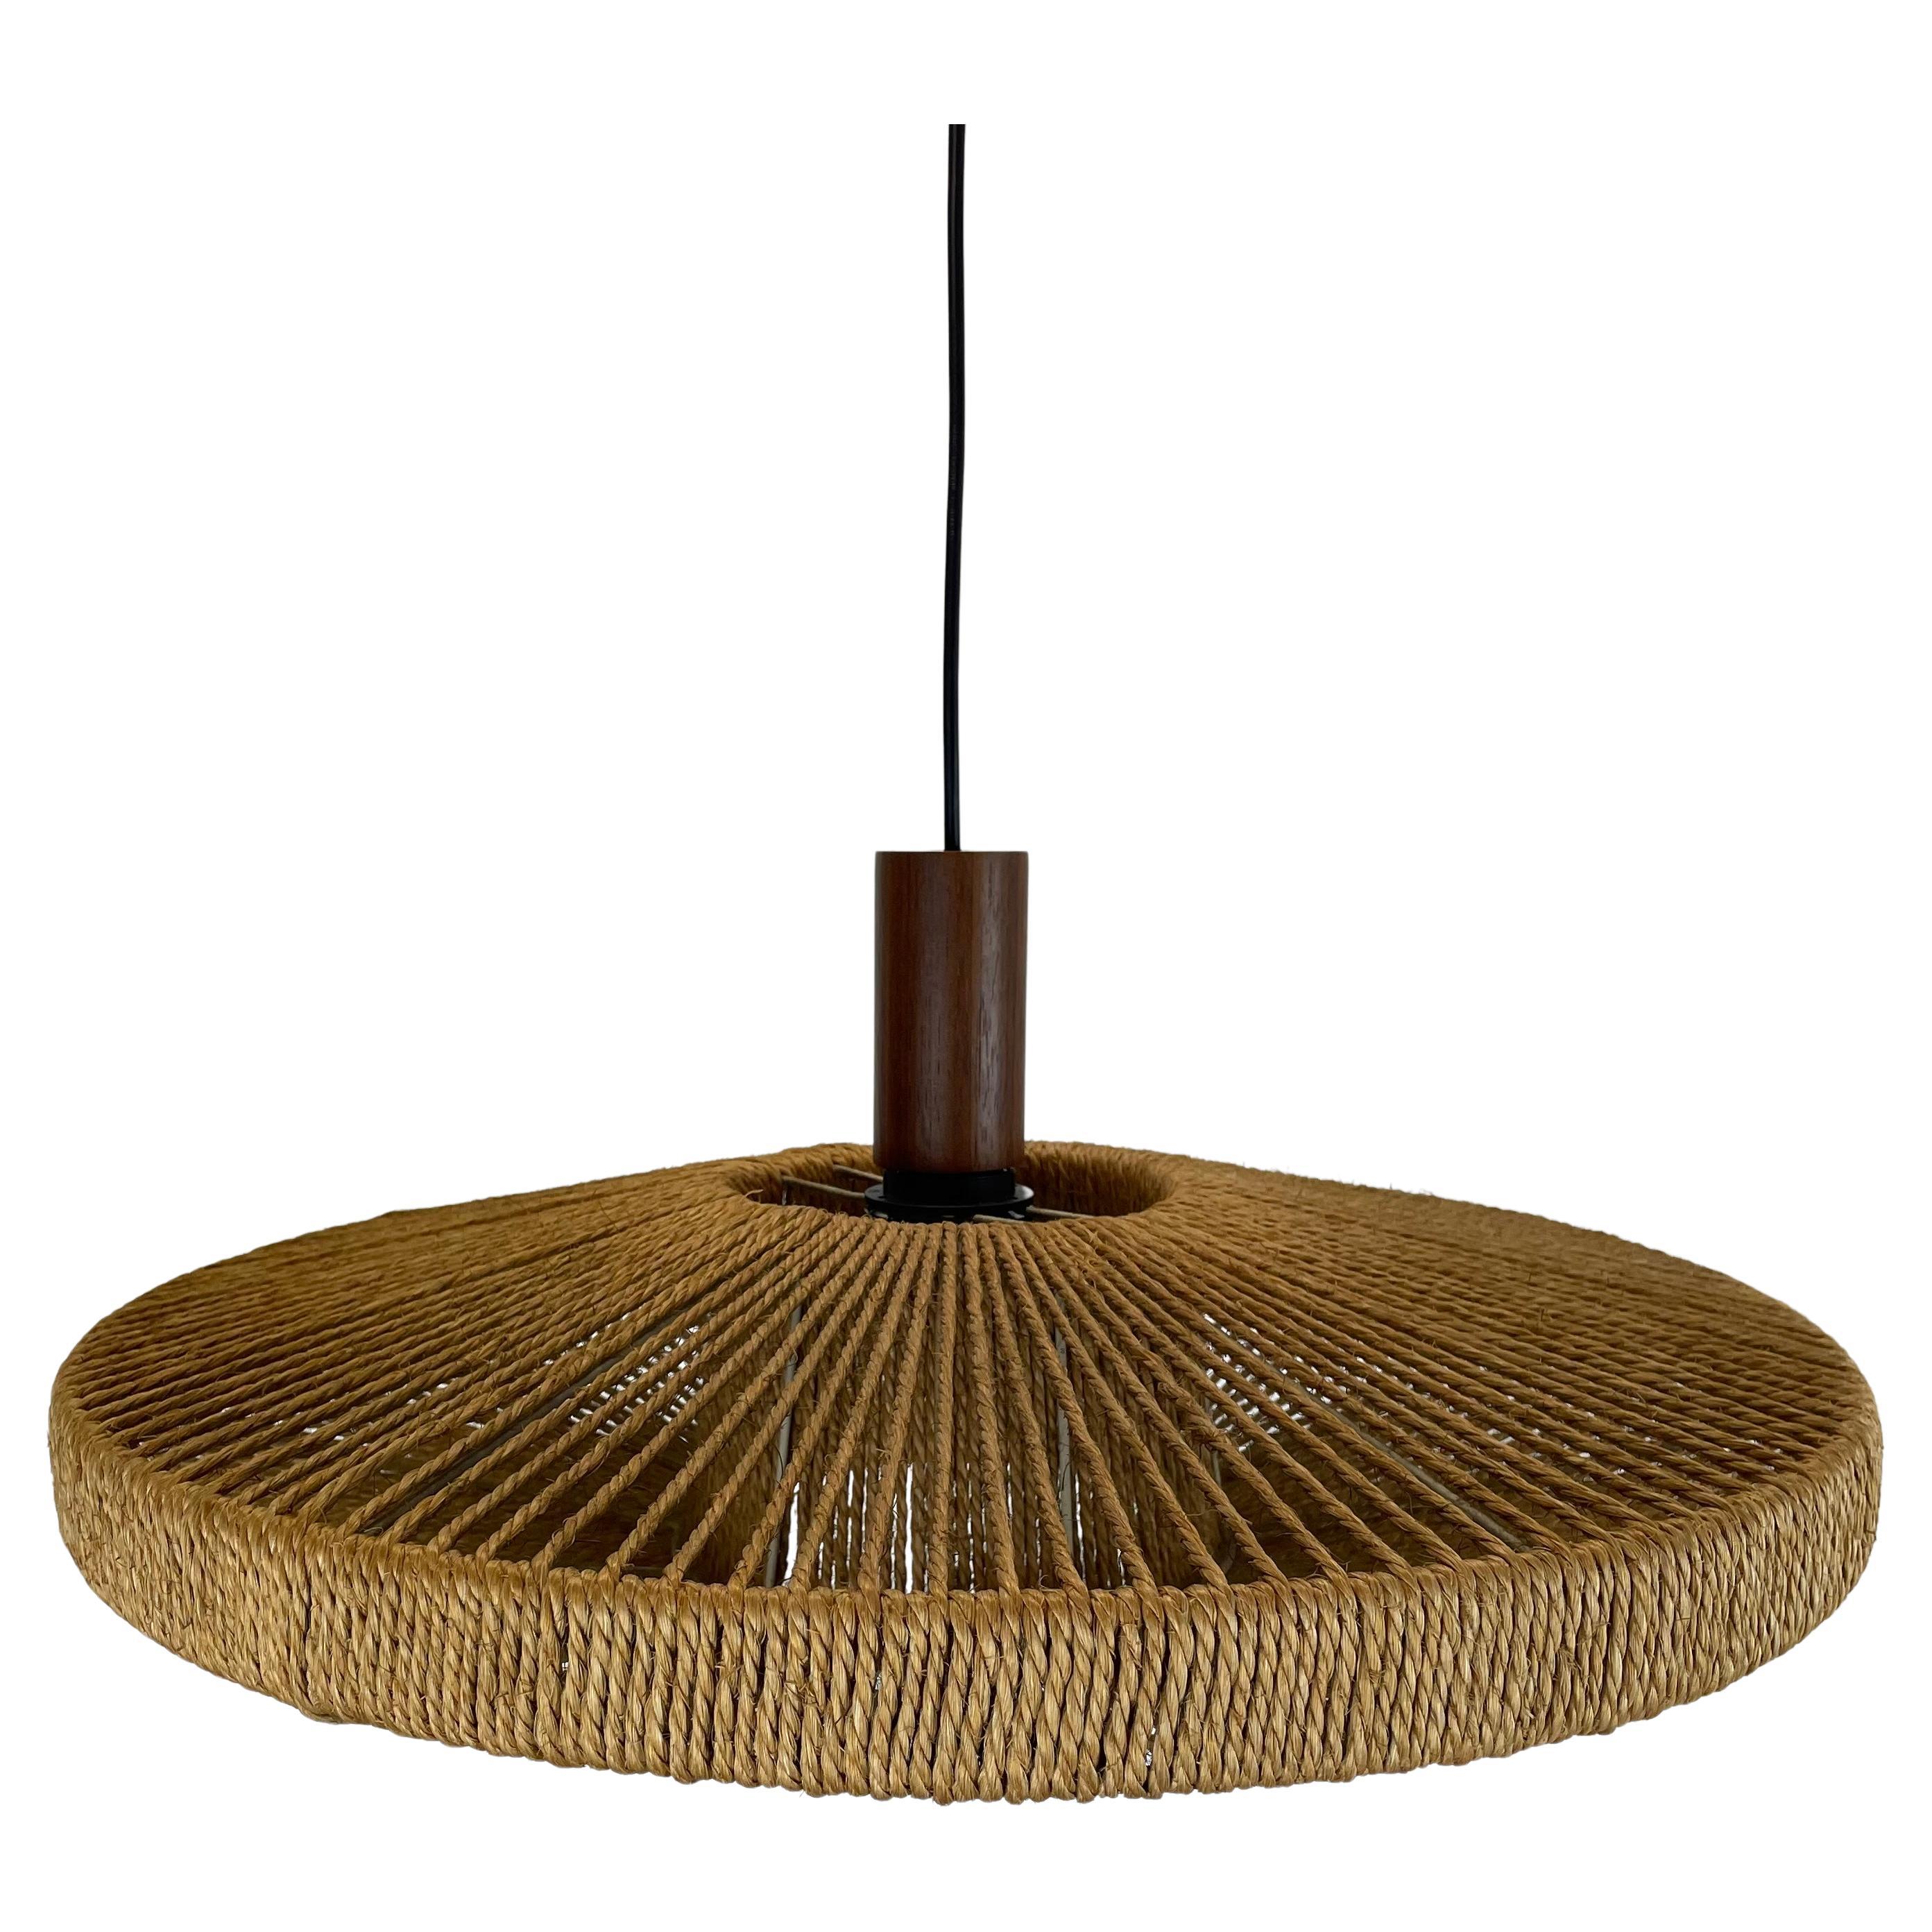 56cm Organic Sisal and Teak Ufo Hanging Light Made by Temde Lights Germany 1960s For Sale